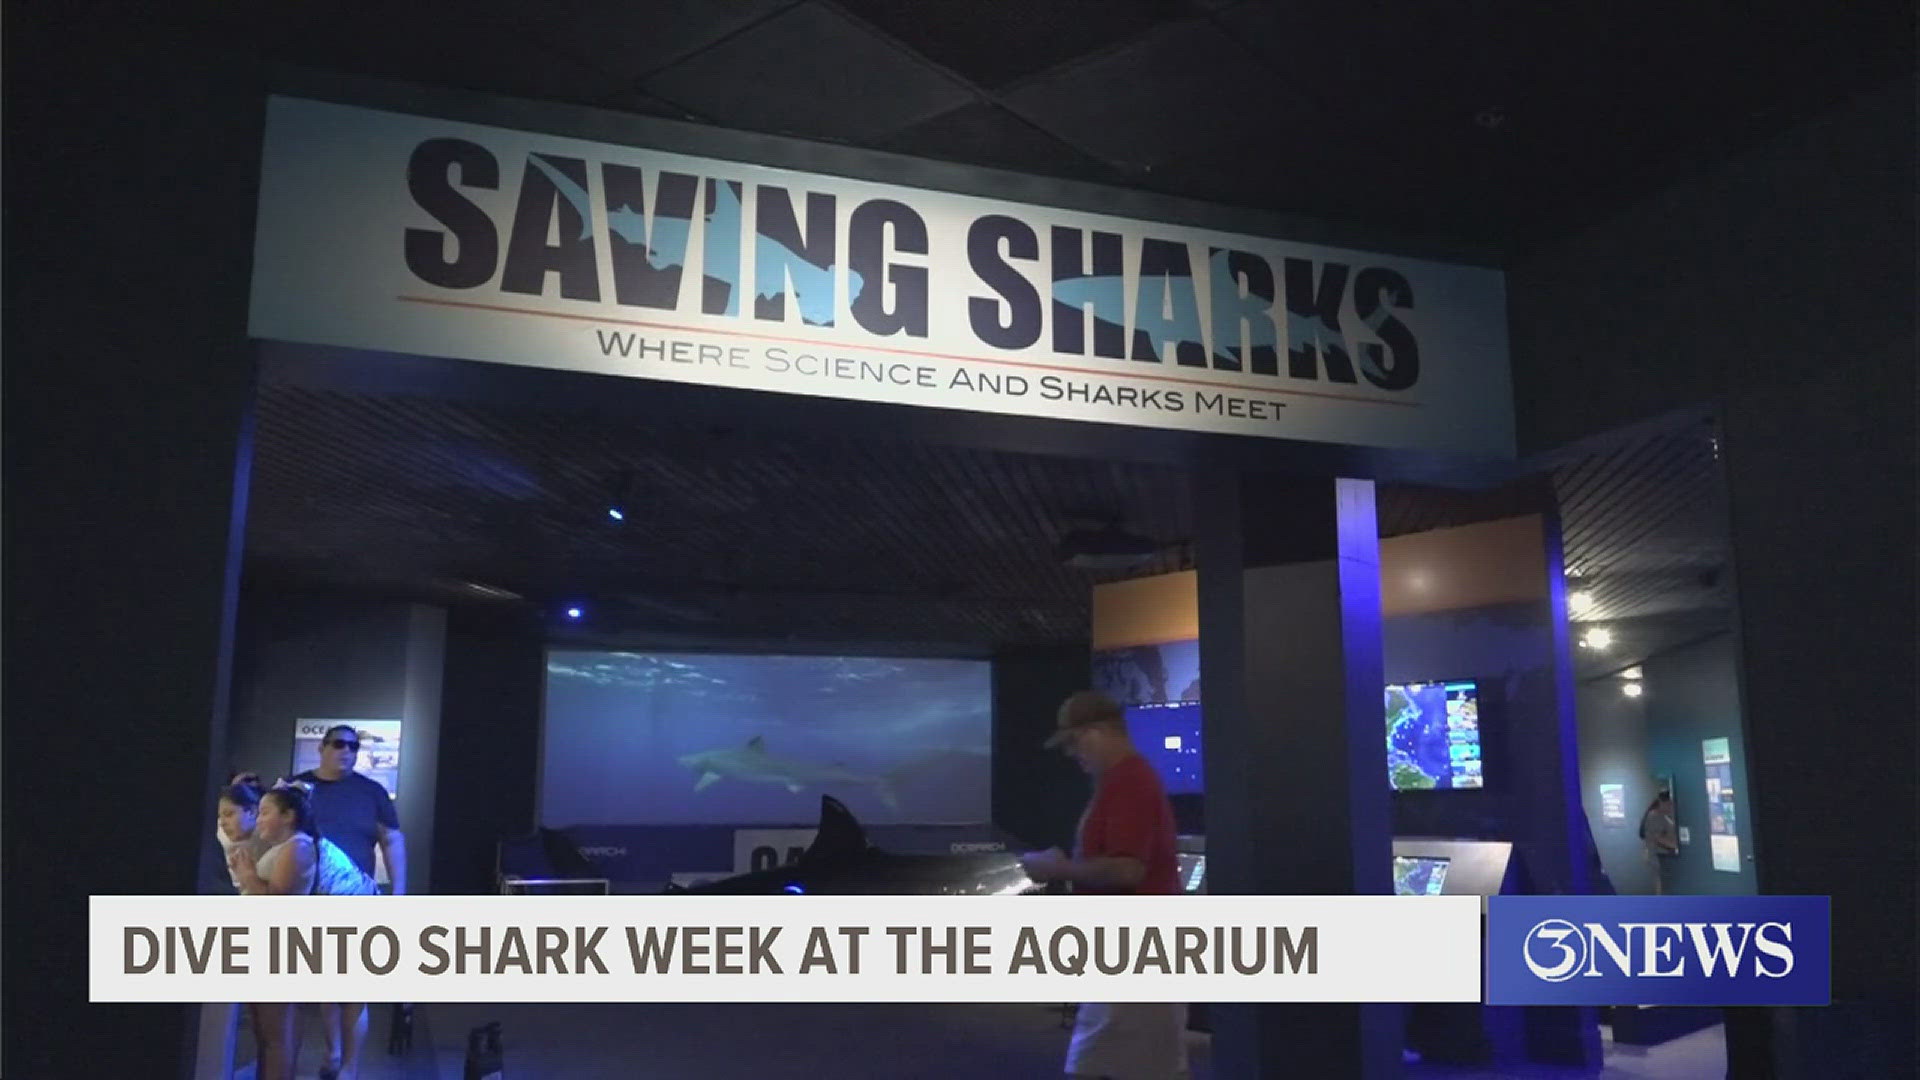 That's right, you can book an experience to hop into the tank yourself to see some sharks up close and personal.